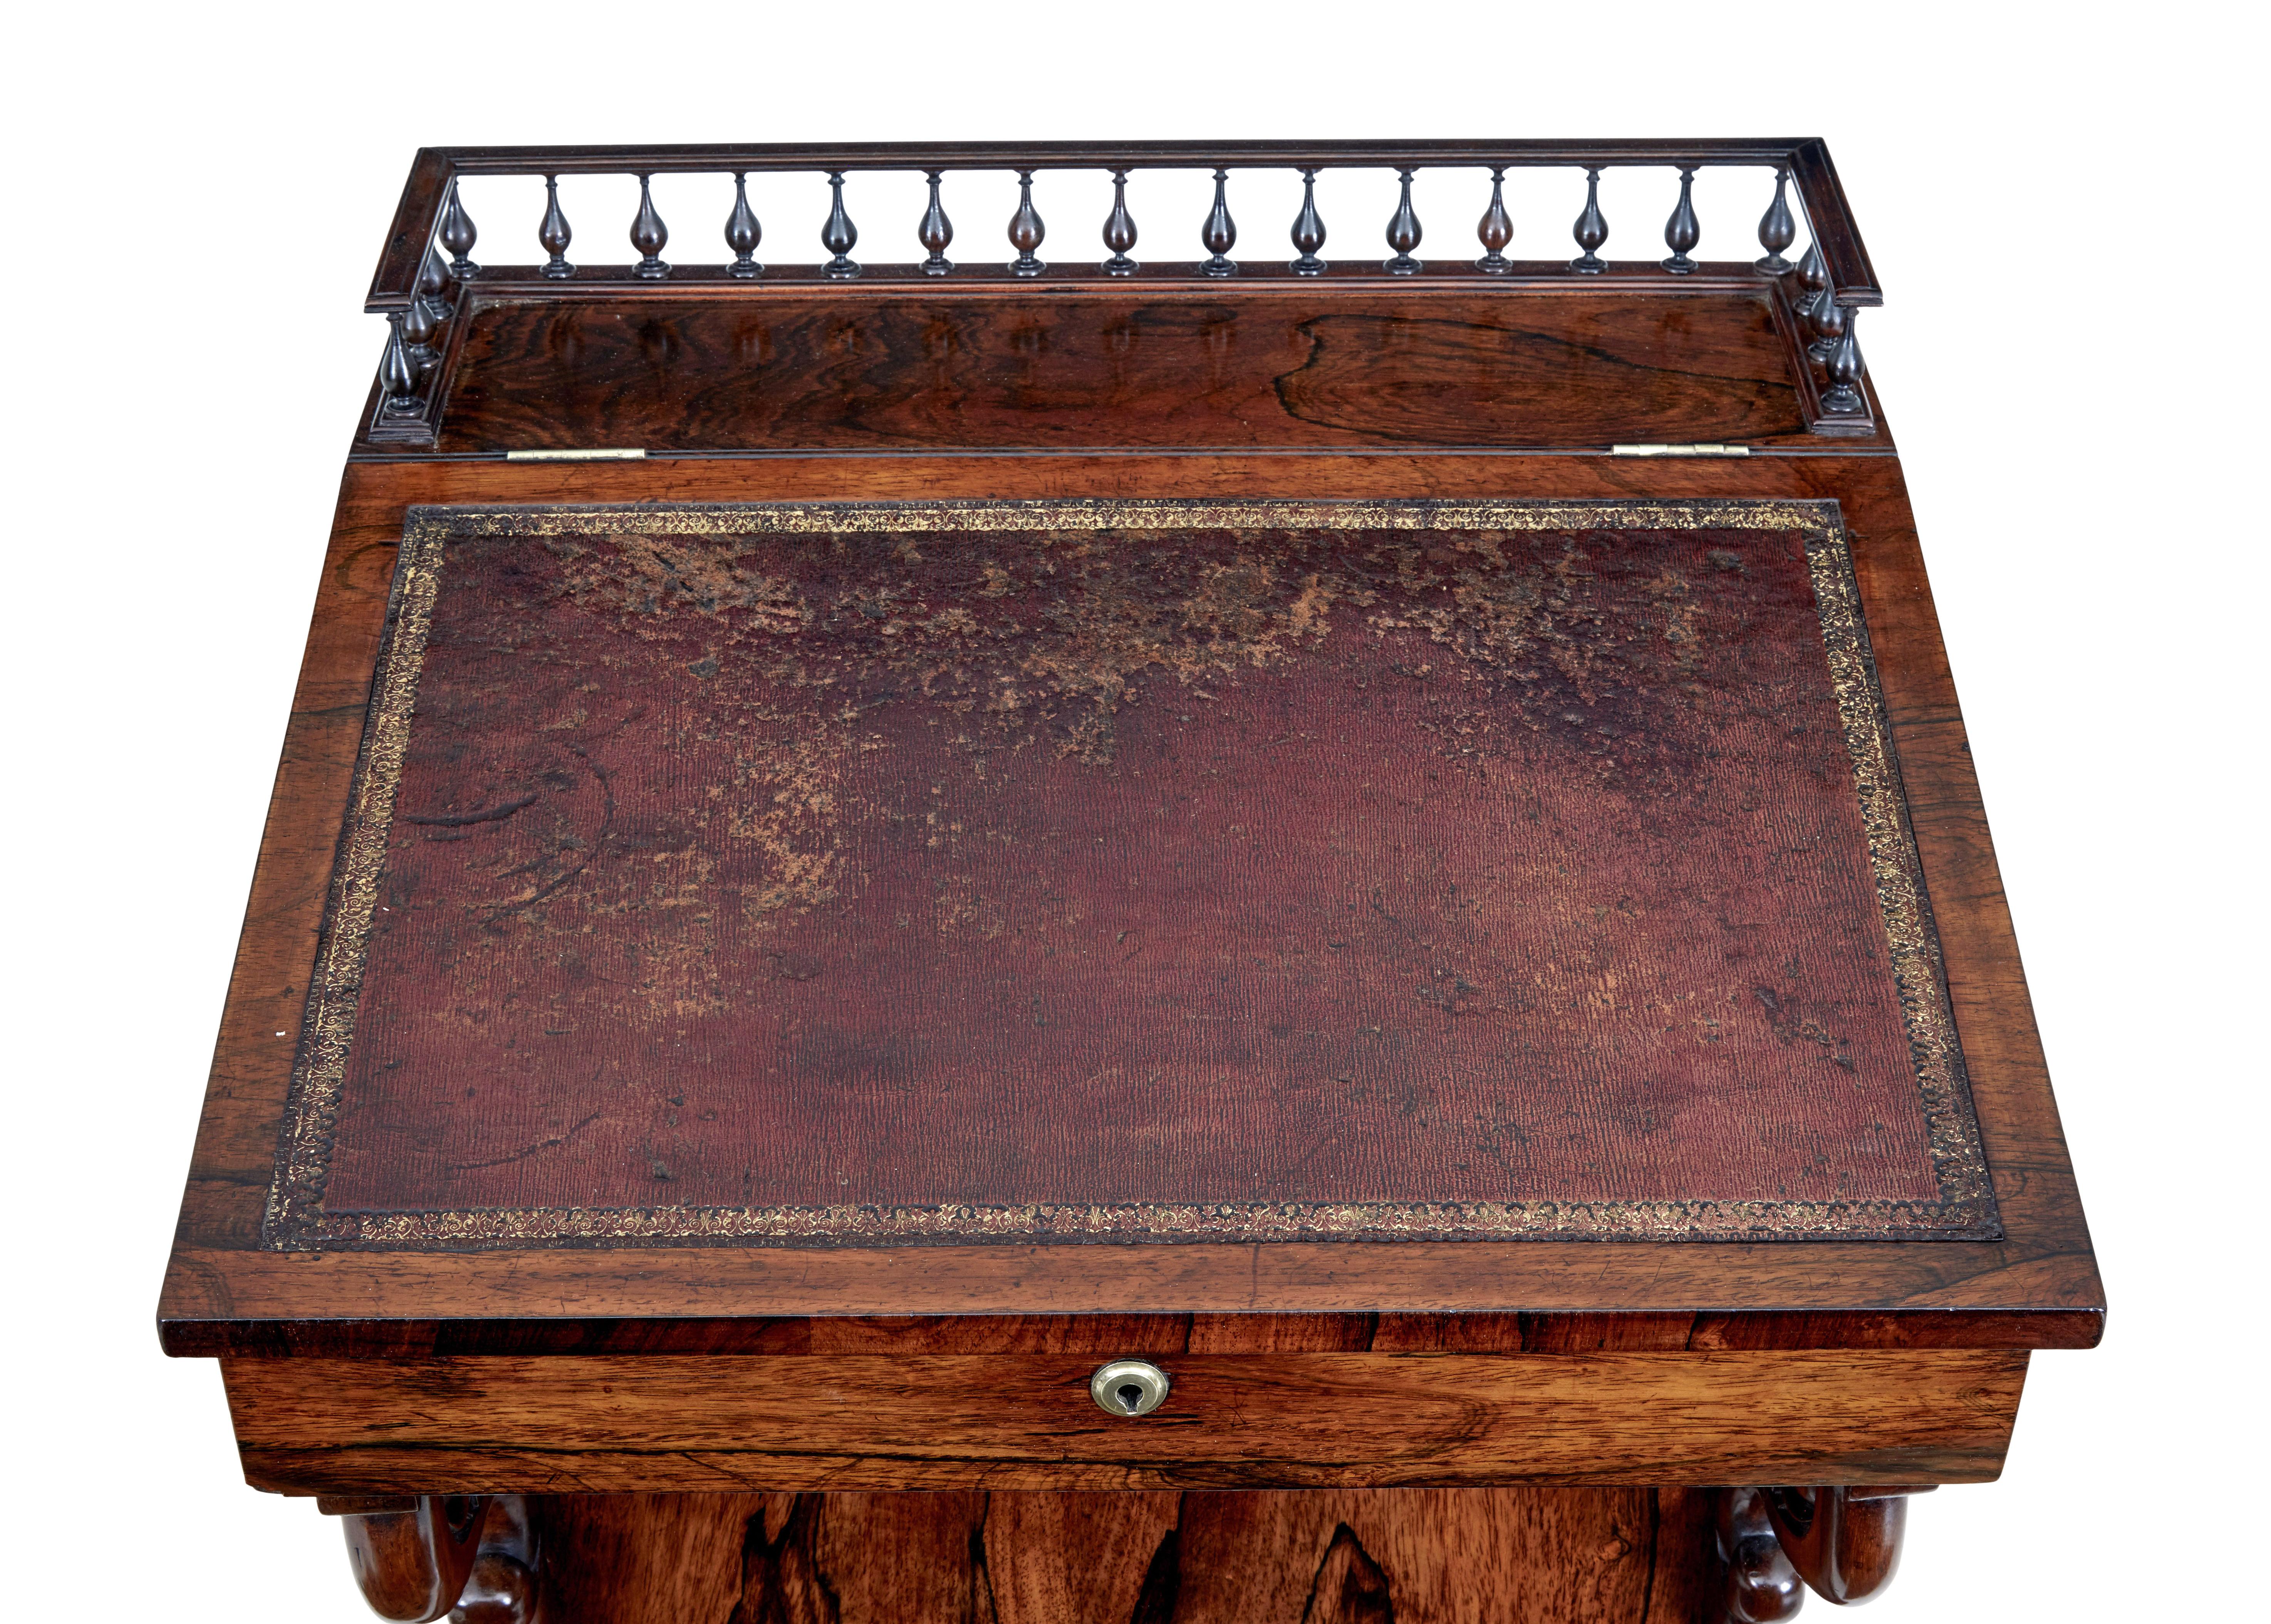 Fine quality regency davenport, circa 1820.

Spindle gallery to the top leading to the original leather writing surface. Top opens to reveal a richly colored interior with 2 drawers.
Writing slope lifts up and with the aid of 2 brass arms,